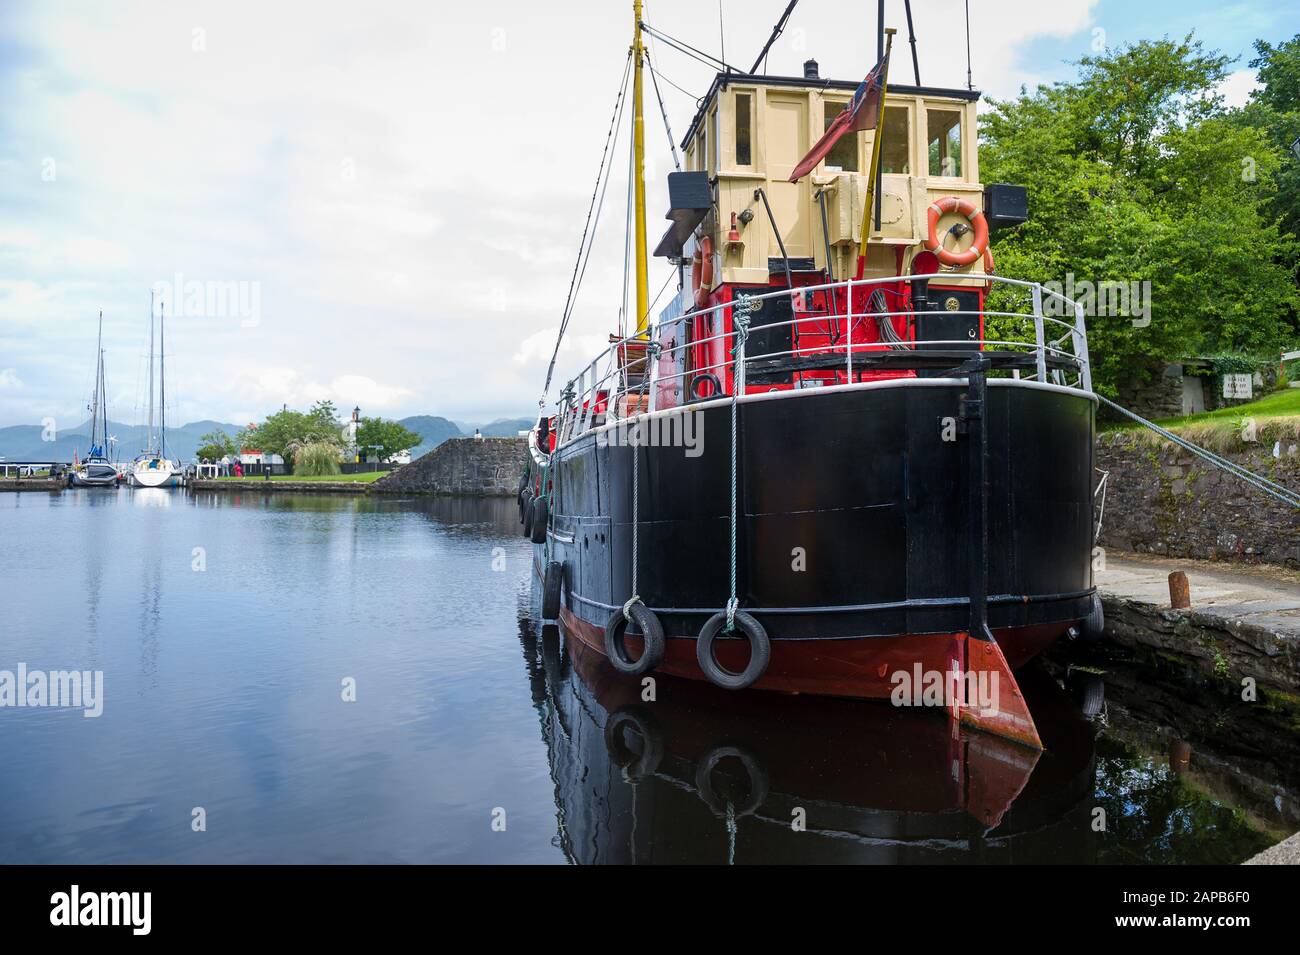 Old steel ship with black hull docked at Crinan channel, Scotland Stock Photo